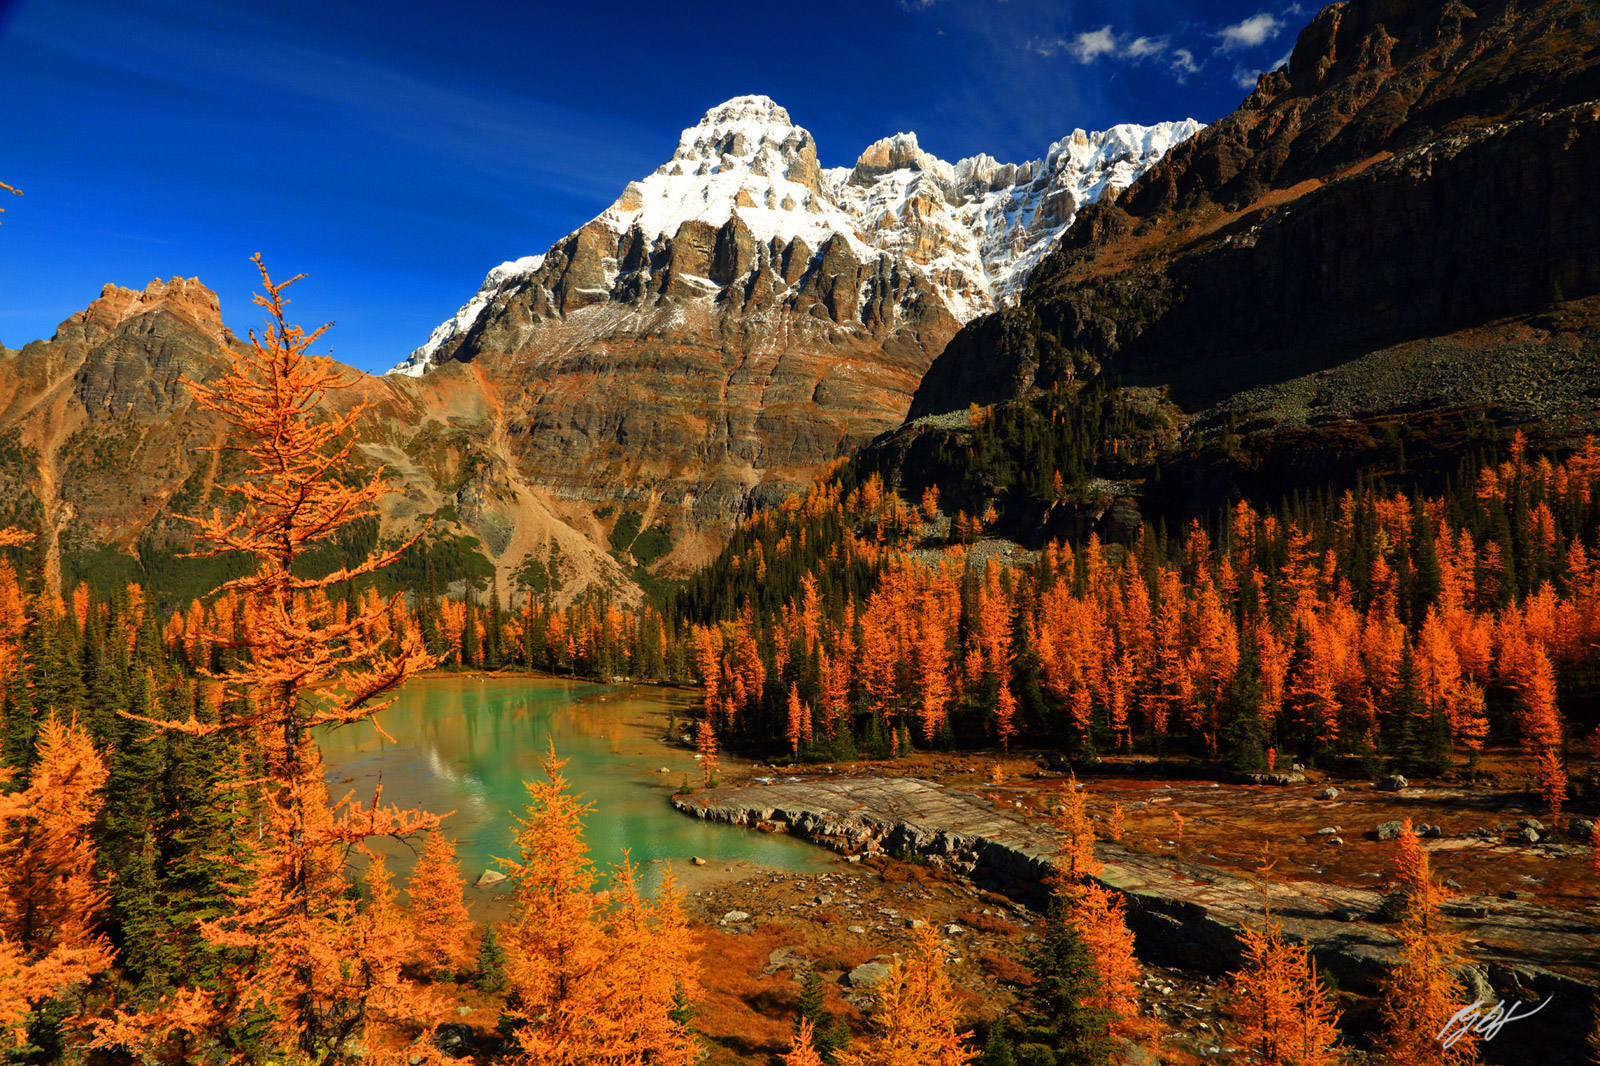 Golden Larch and Mt Huber from Opabin Plateau in the Lake O'Hara Region of Yoho National Park in Canada